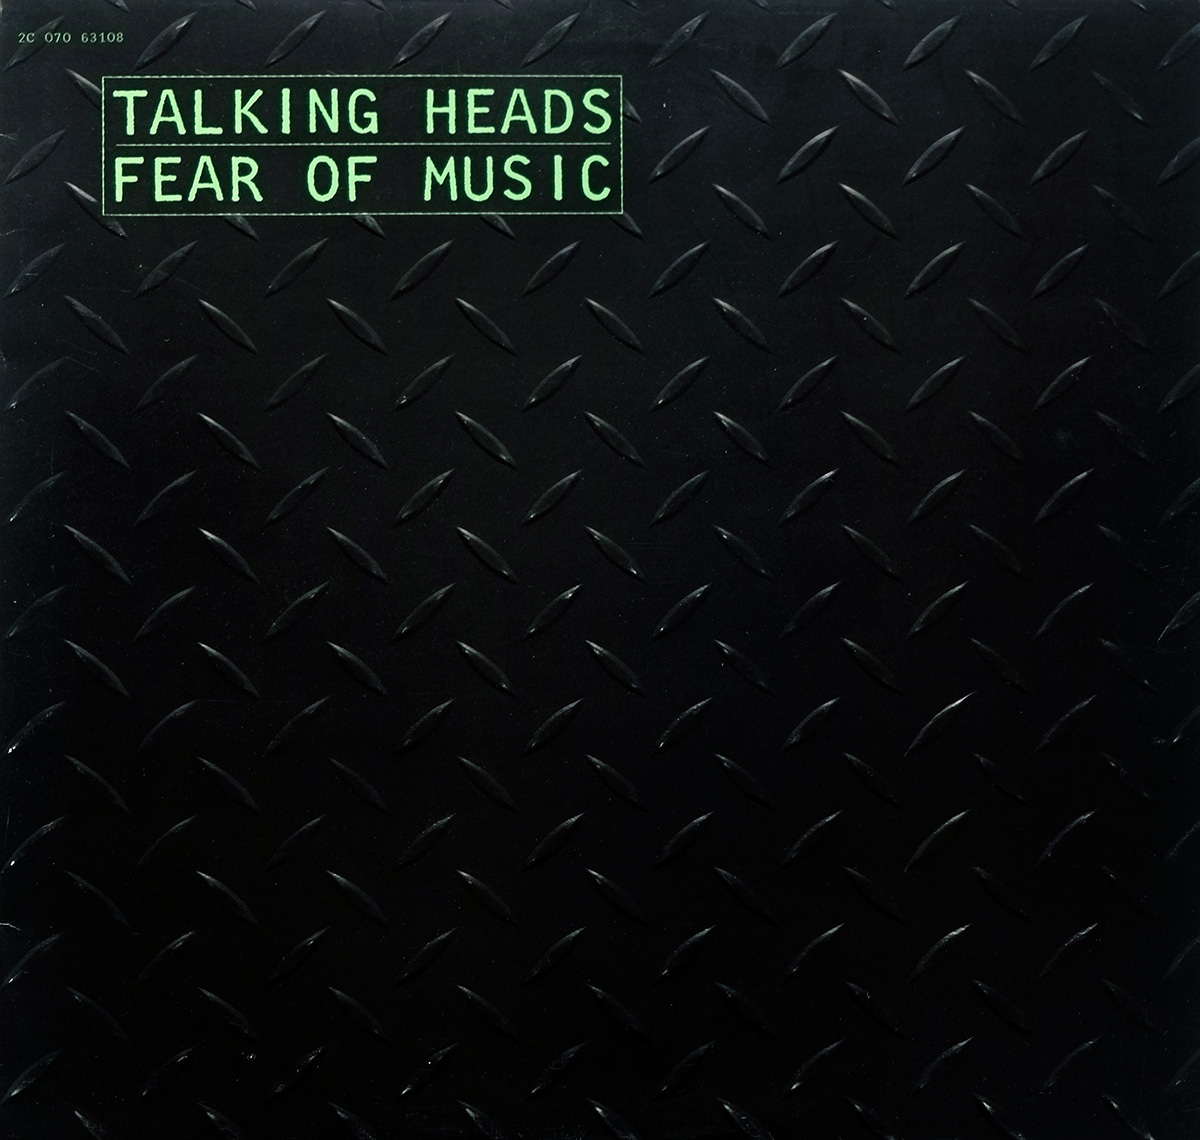 Album Front cover Photo of TALKING HEADS Fear Of Music France https://vinyl-records.nl/